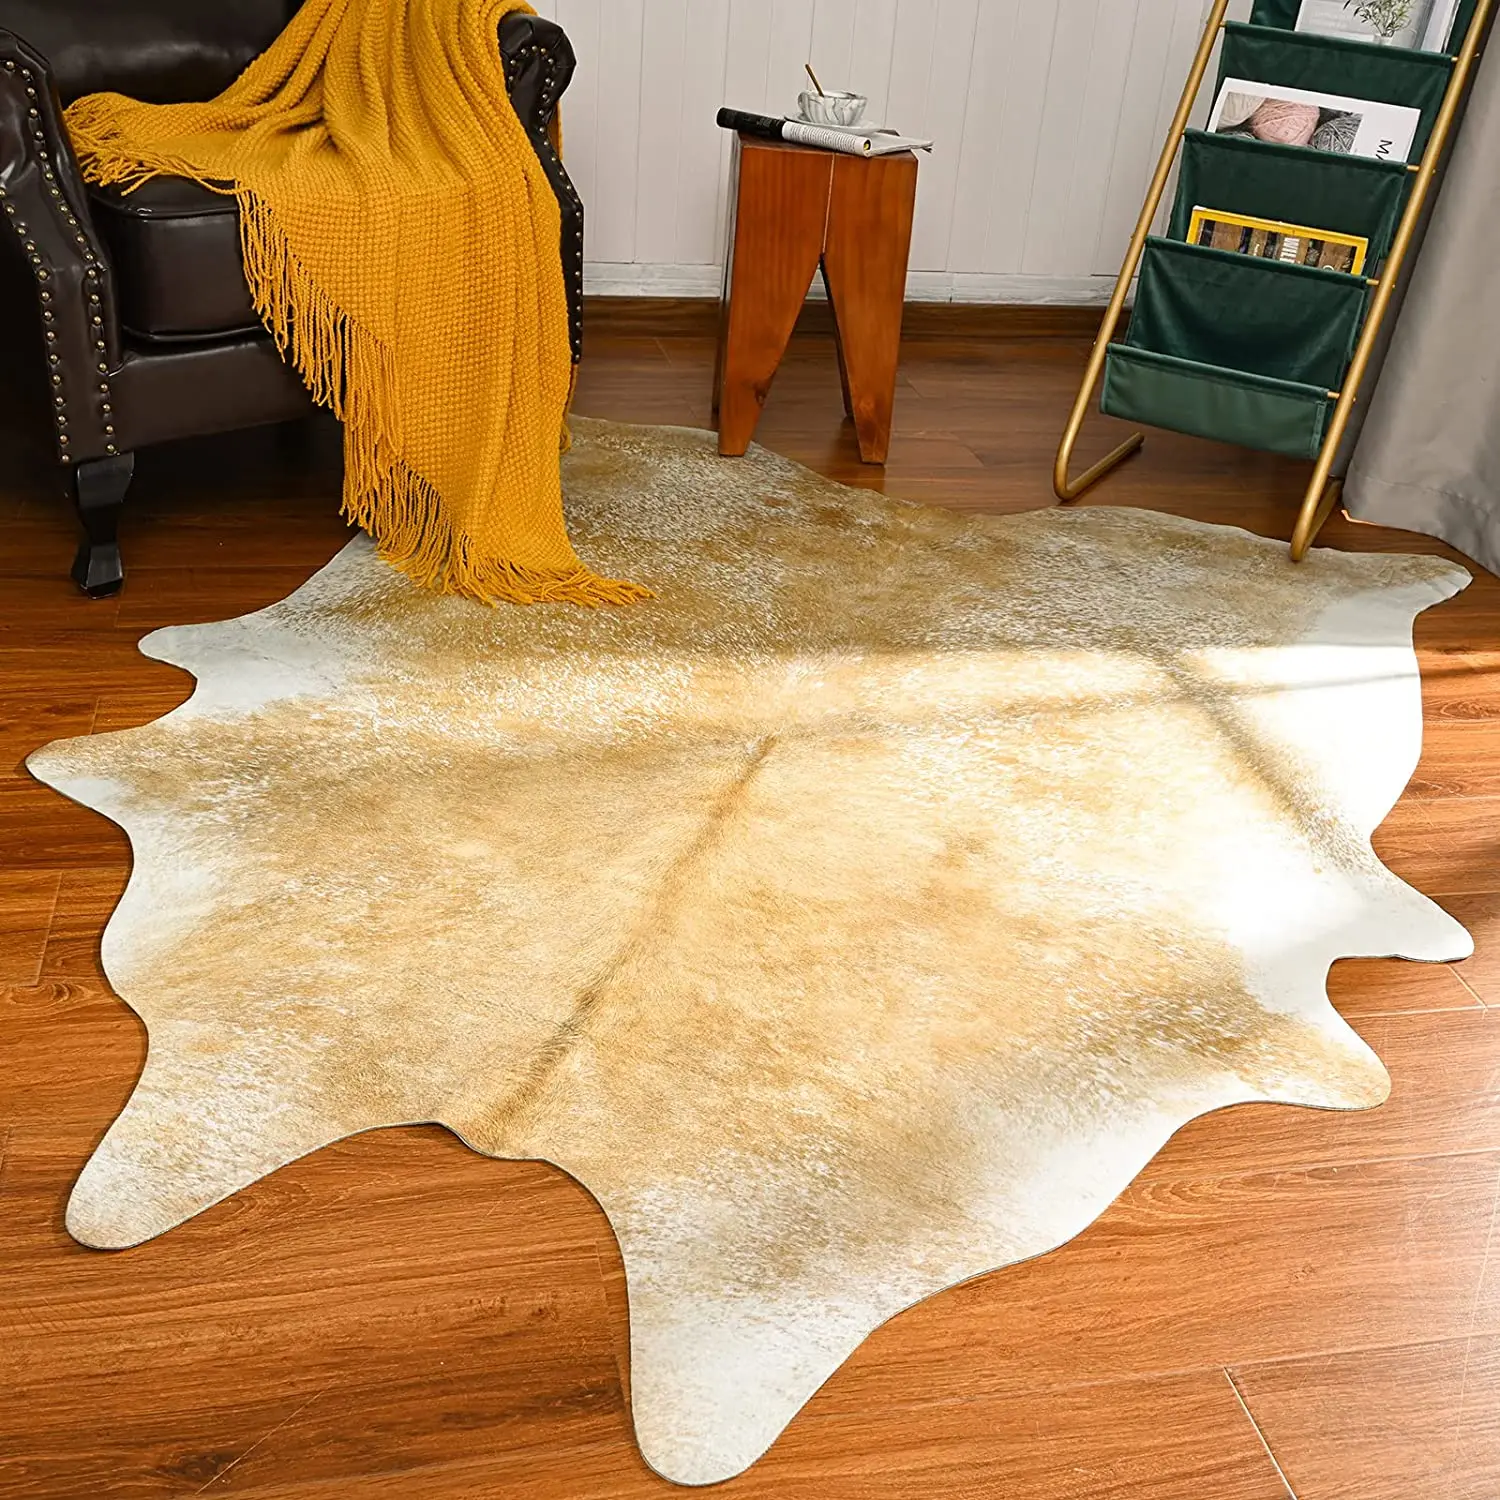 Cowhide Carpet Cow Print Rug American Style for Bedroom Living Room Cute Animal Printed Carpet Faux Cowhide Rugs for Home Decor